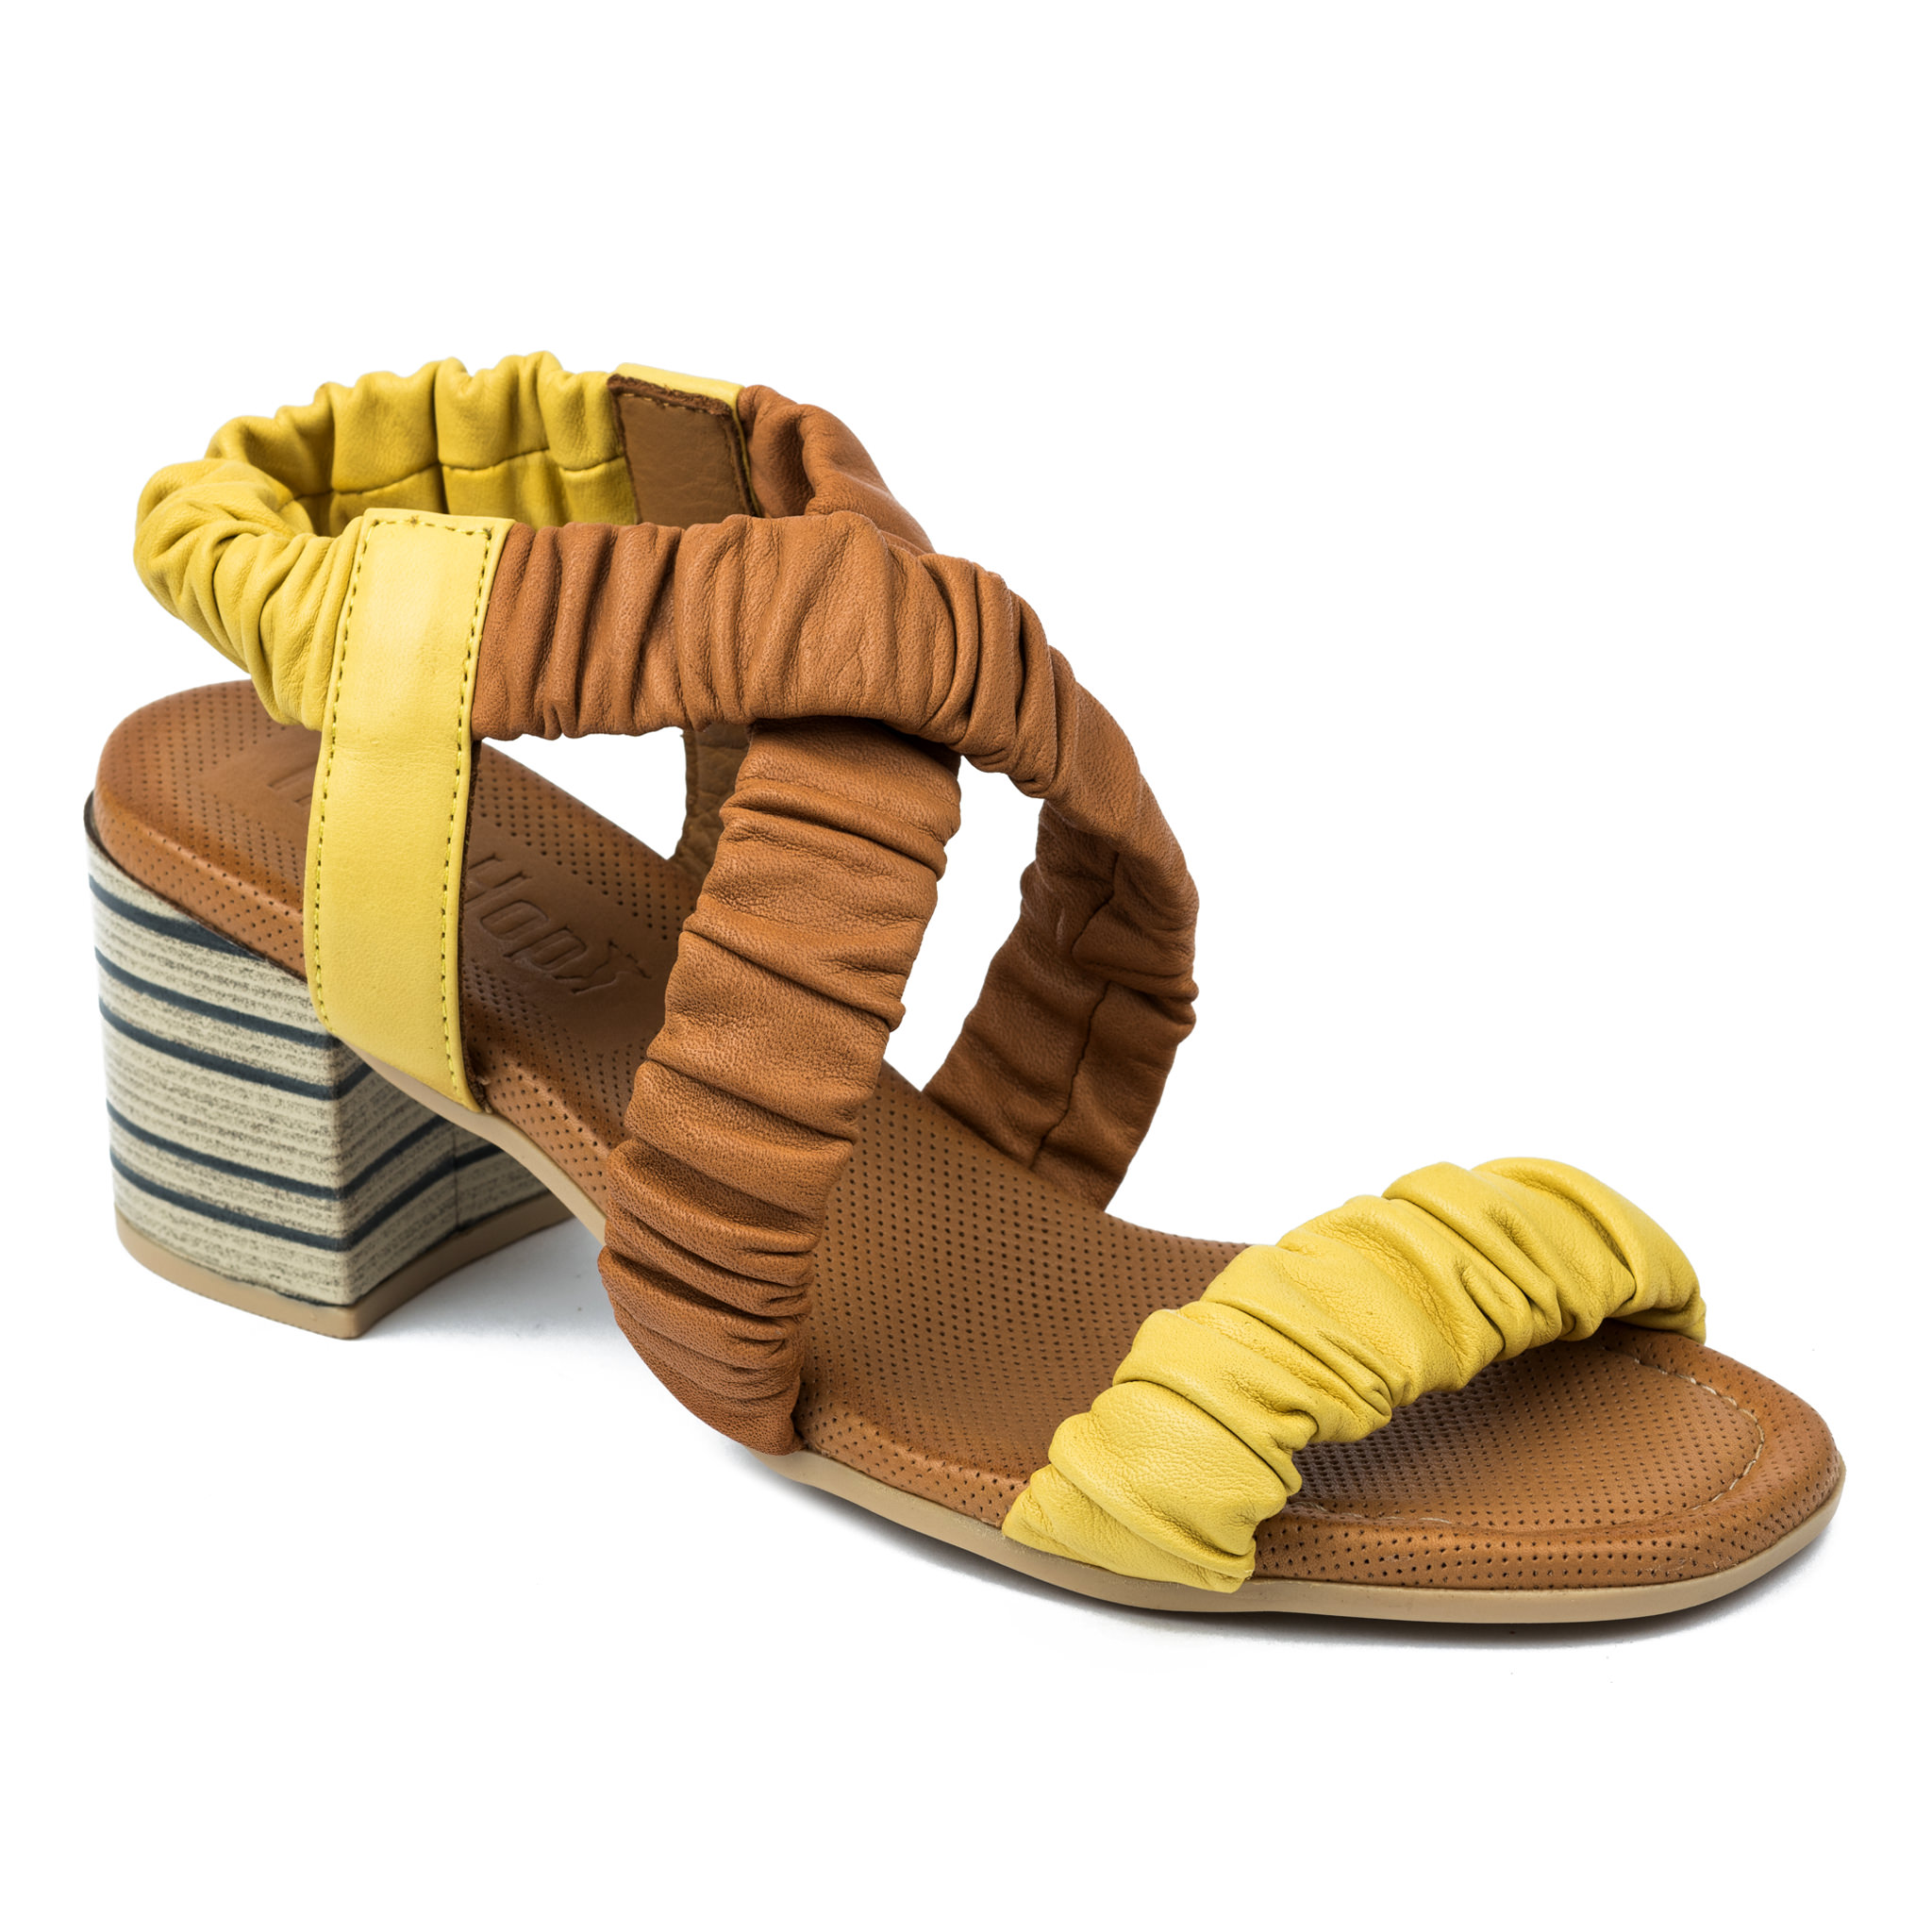 Leather sandals A712 - YELLOW